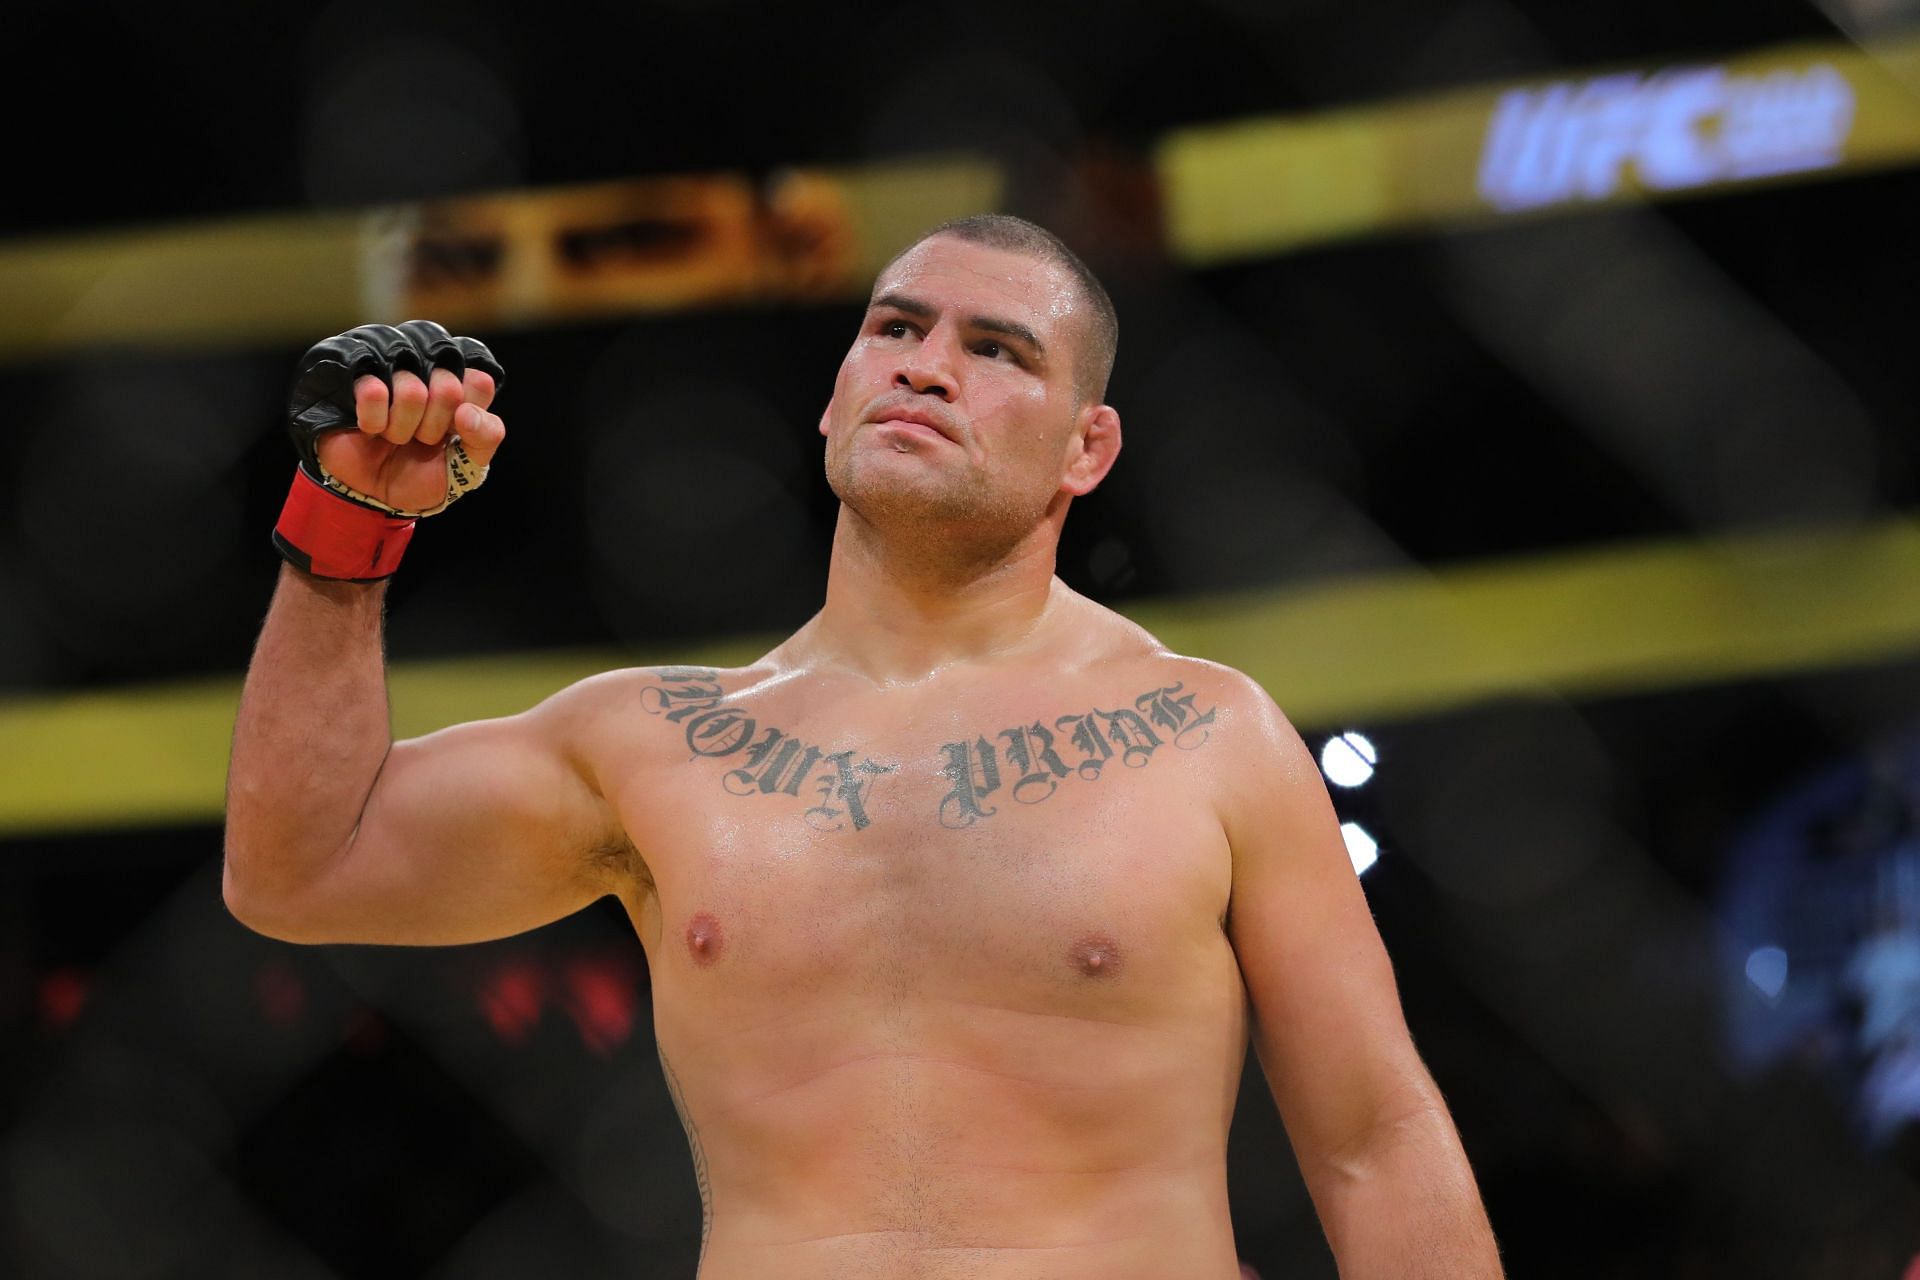 Cain Velasquez struggled for traction in WWE despite his UFC success